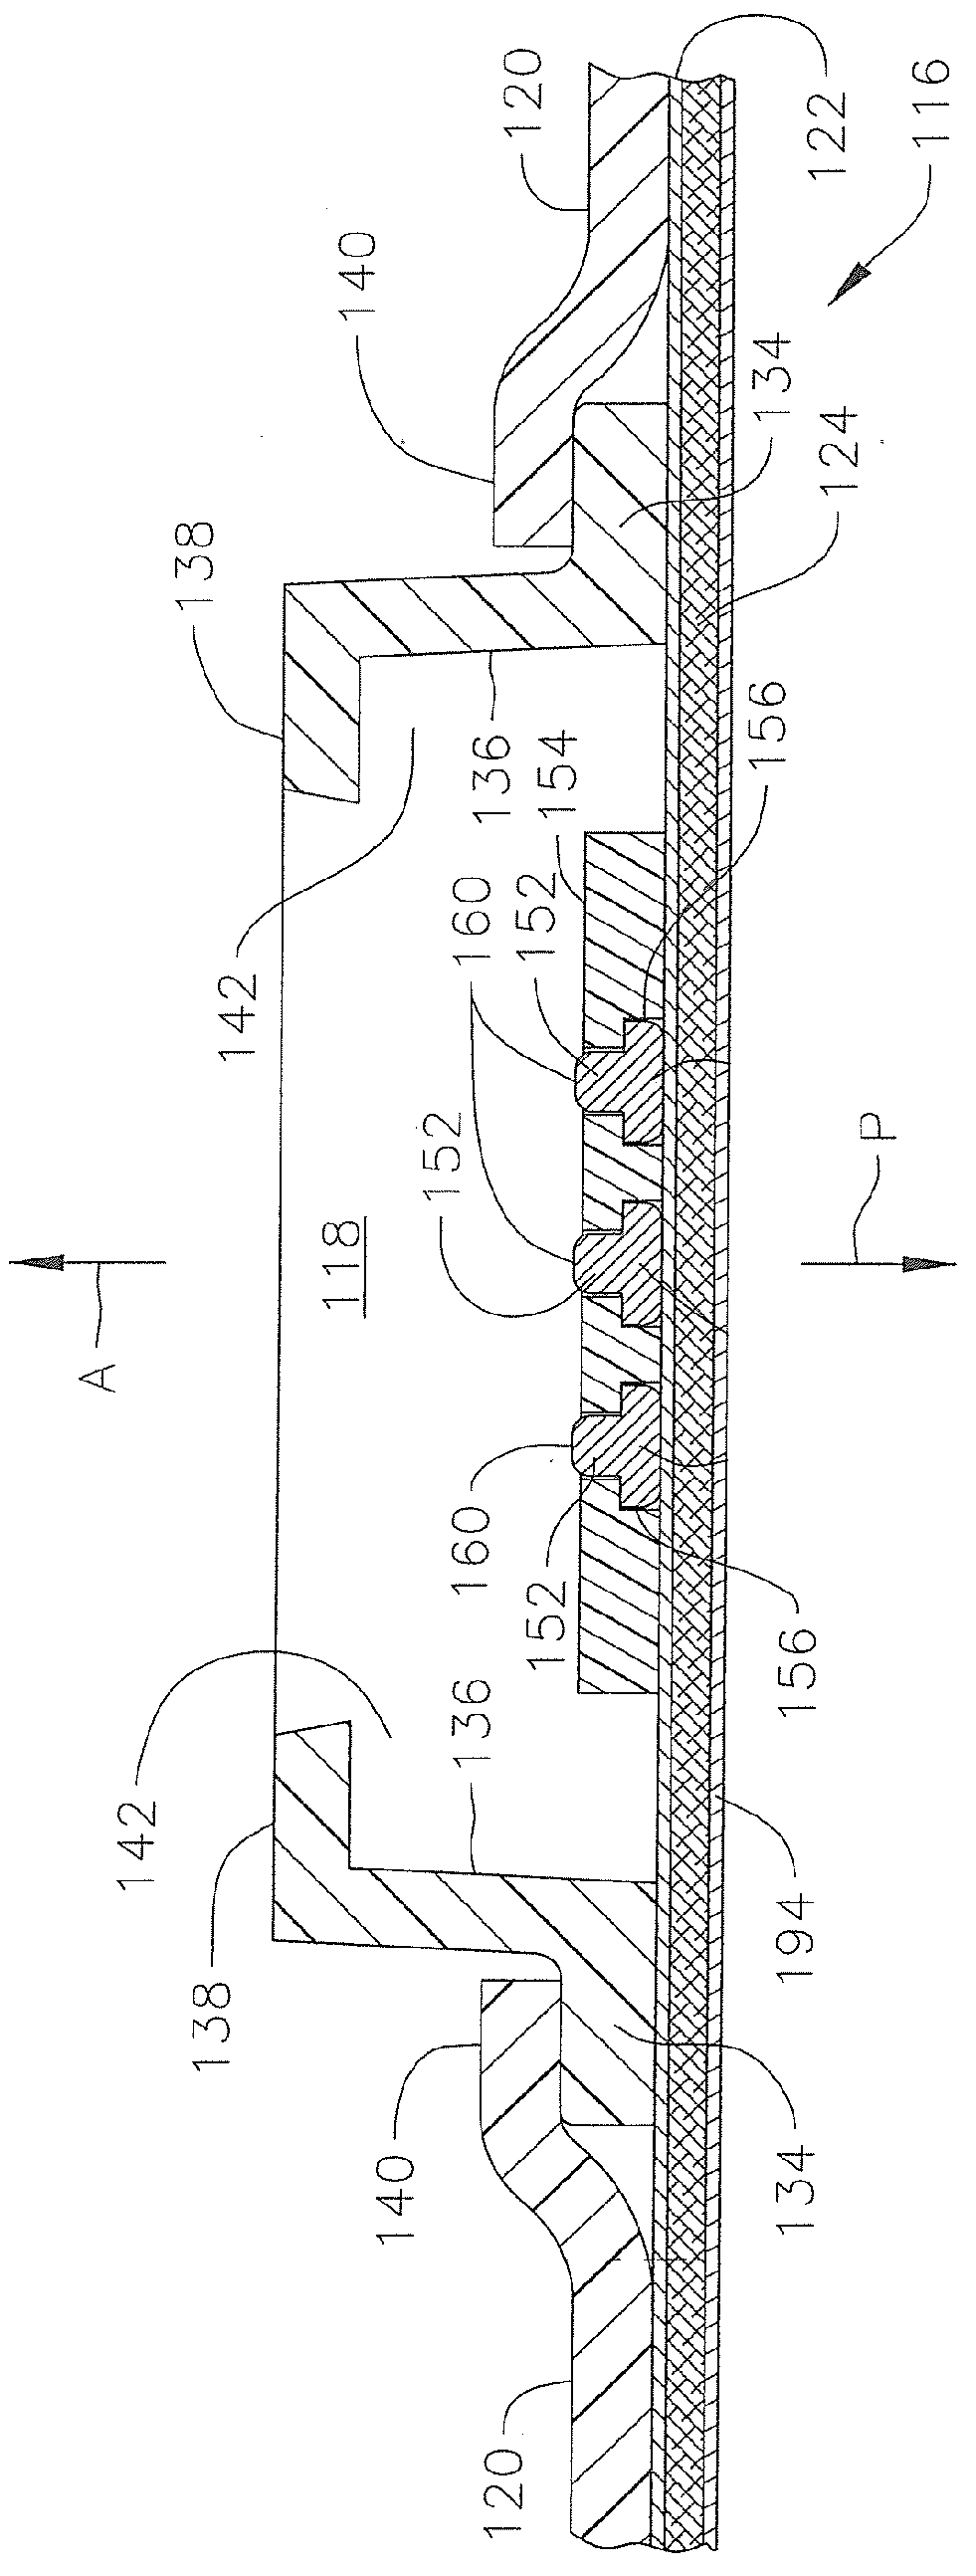 Single radio-transparent connector for multi-functional reference patch